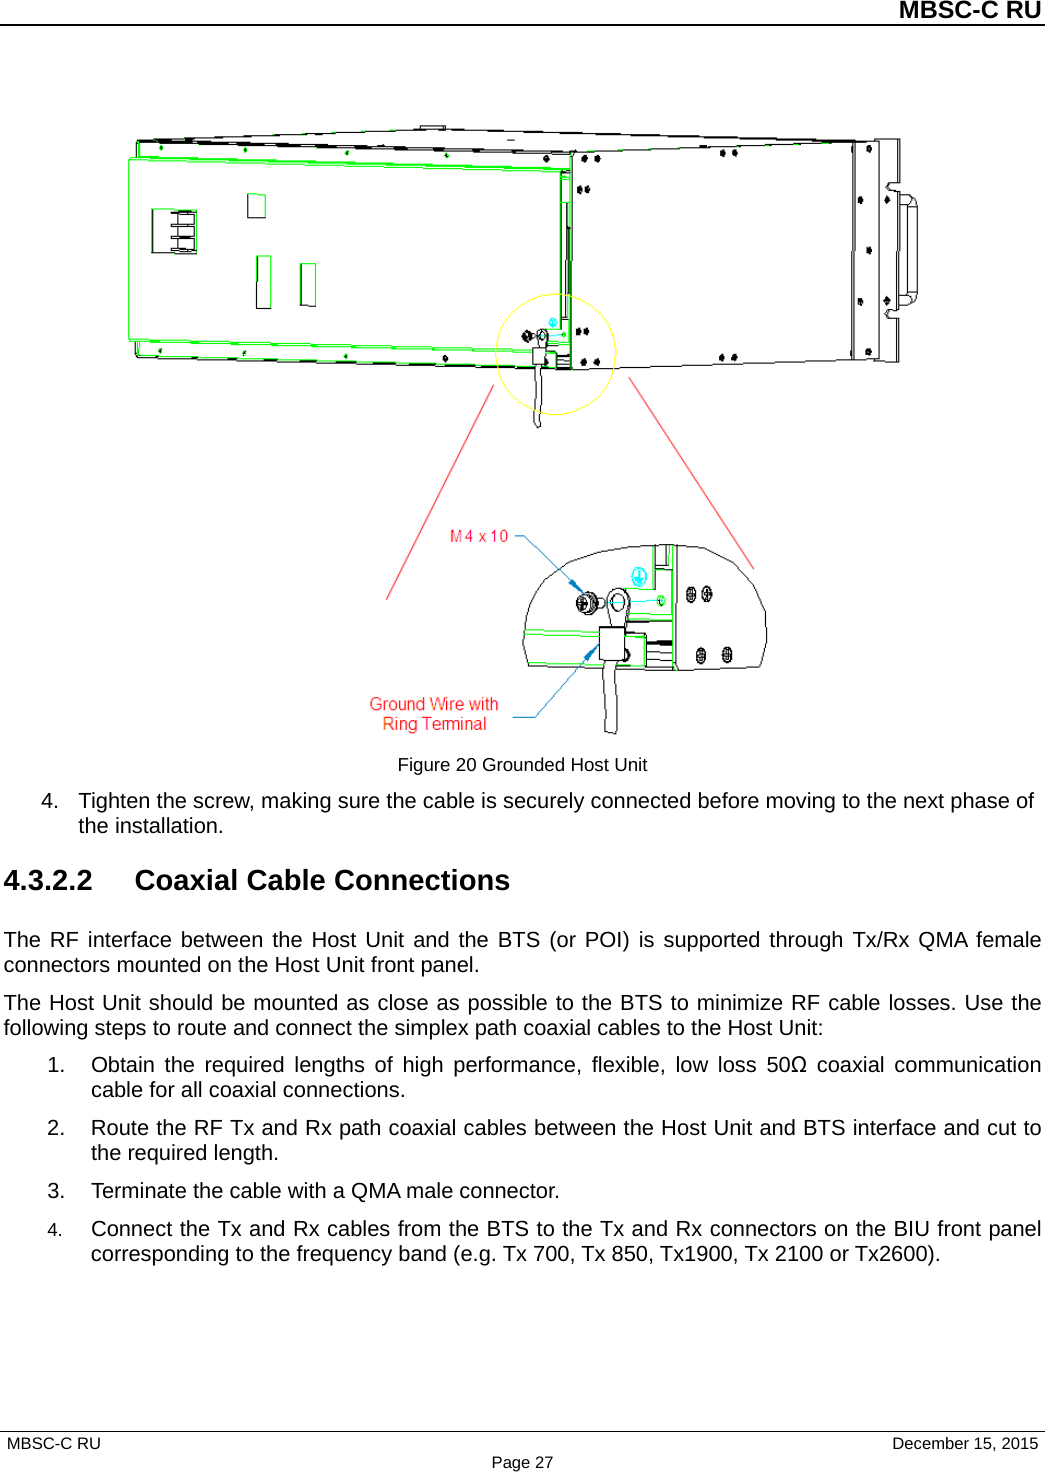          MBSC-C RU   MBSC-C RU                                     December 15, 2015 Page 27  Figure 20 Grounded Host Unit 4. Tighten the screw, making sure the cable is securely connected before moving to the next phase of the installation. 4.3.2.2 Coaxial Cable Connections The RF interface between the Host Unit and the BTS (or POI) is supported through Tx/Rx QMA female connectors mounted on the Host Unit front panel.   The Host Unit should be mounted as close as possible to the BTS to minimize RF cable losses. Use the following steps to route and connect the simplex path coaxial cables to the Host Unit: 1. Obtain the required lengths of high performance, flexible, low loss 50Ω coaxial communication cable for all coaxial connections. 2. Route the RF Tx and Rx path coaxial cables between the Host Unit and BTS interface and cut to the required length.   3. Terminate the cable with a QMA male connector. 4. Connect the Tx and Rx cables from the BTS to the Tx and Rx connectors on the BIU front panel corresponding to the frequency band (e.g. Tx 700, Tx 850, Tx1900, Tx 2100 or Tx2600). 